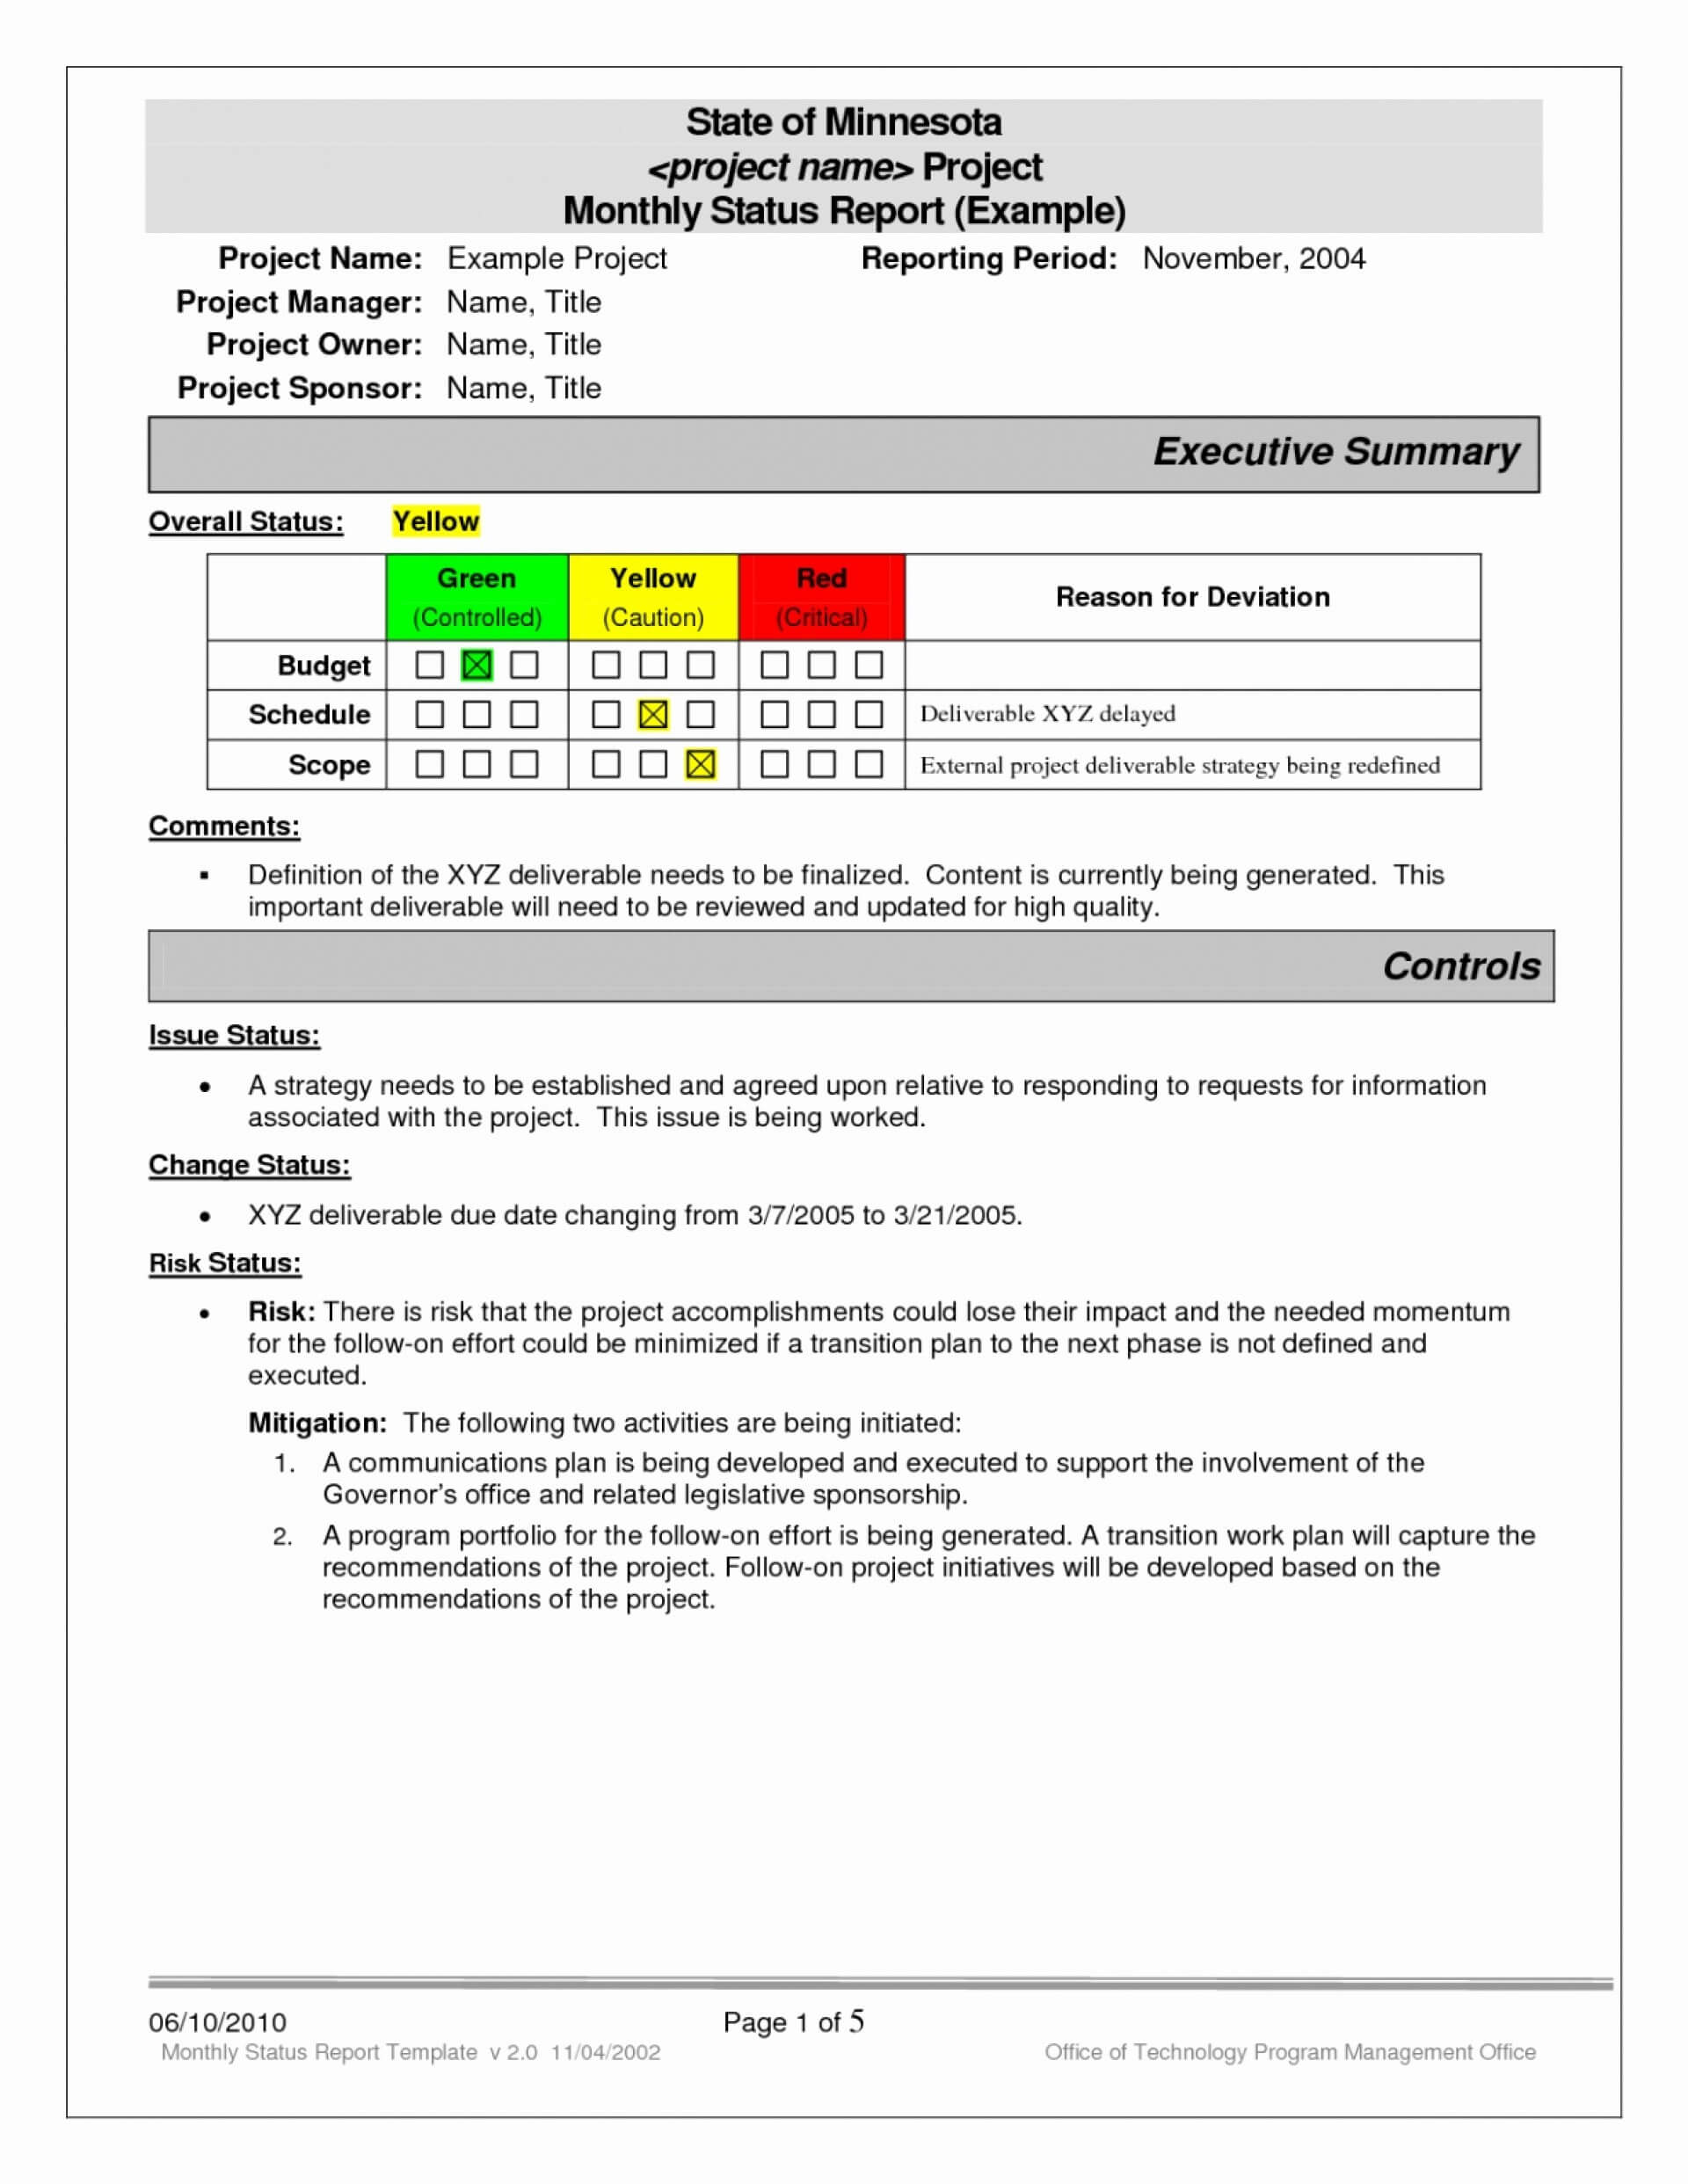 023 Excel Project Status Report Weekly Template 4Vy49Mzf With Regard To Project Status Report Template Word 2010